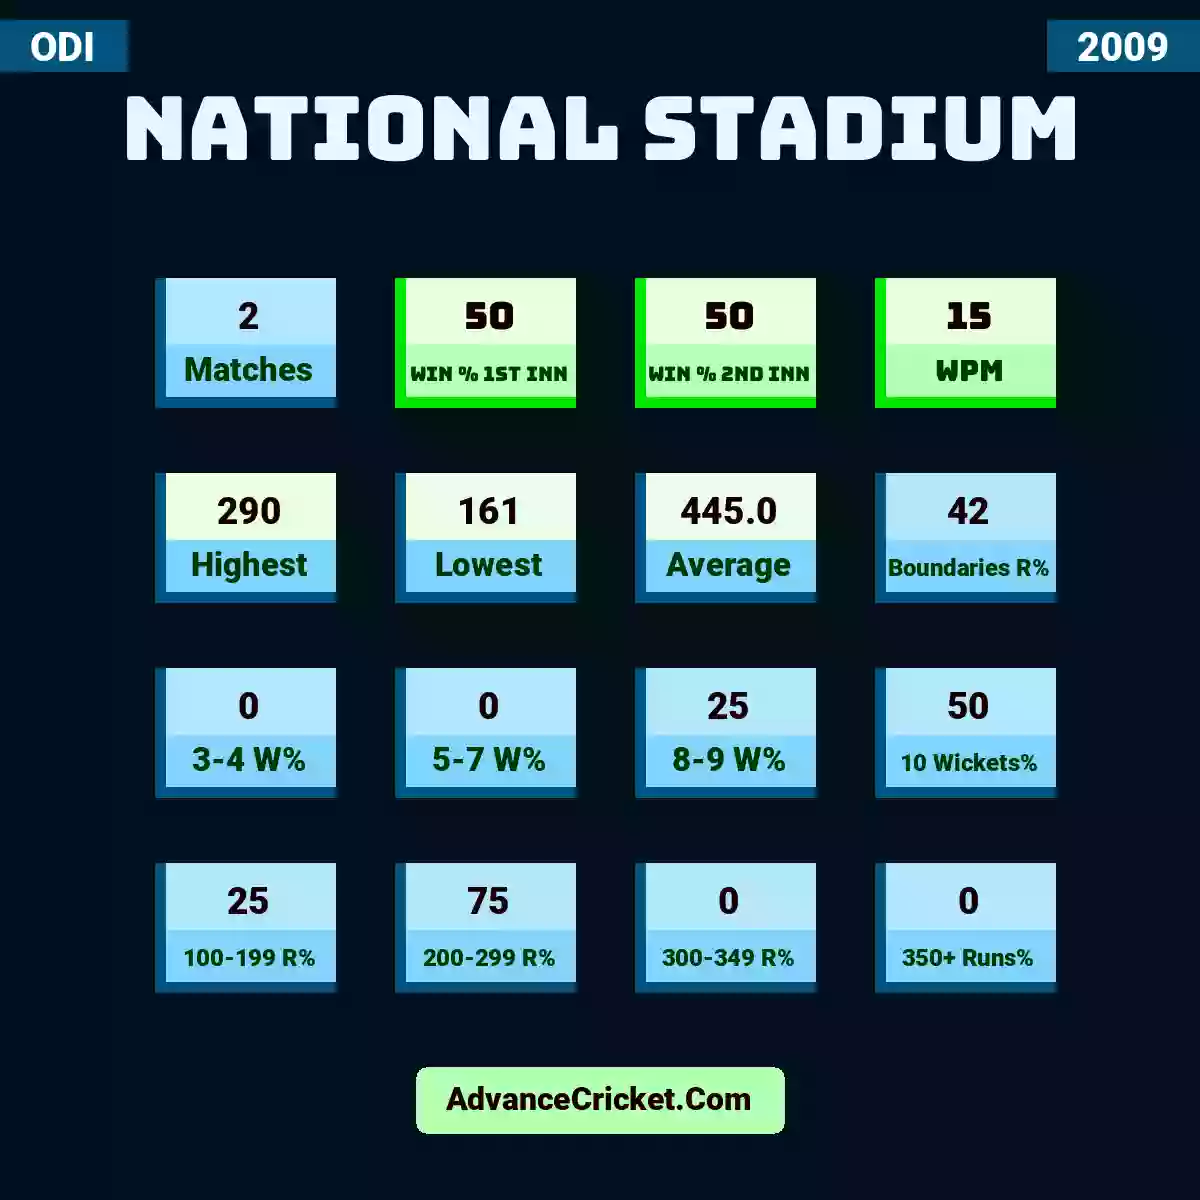 Image showing National Stadium with Matches: 2, Win % 1st Inn: 50, Win % 2nd Inn: 50, WPM: 15, Highest: 290, Lowest: 161, Average: 445.0, Boundaries R%: 42, 3-4 W%: 0, 5-7 W%: 0, 8-9 W%: 25, 10 Wickets%: 50, 100-199 R%: 25, 200-299 R%: 75, 300-349 R%: 0, 350+ Runs%: 0.